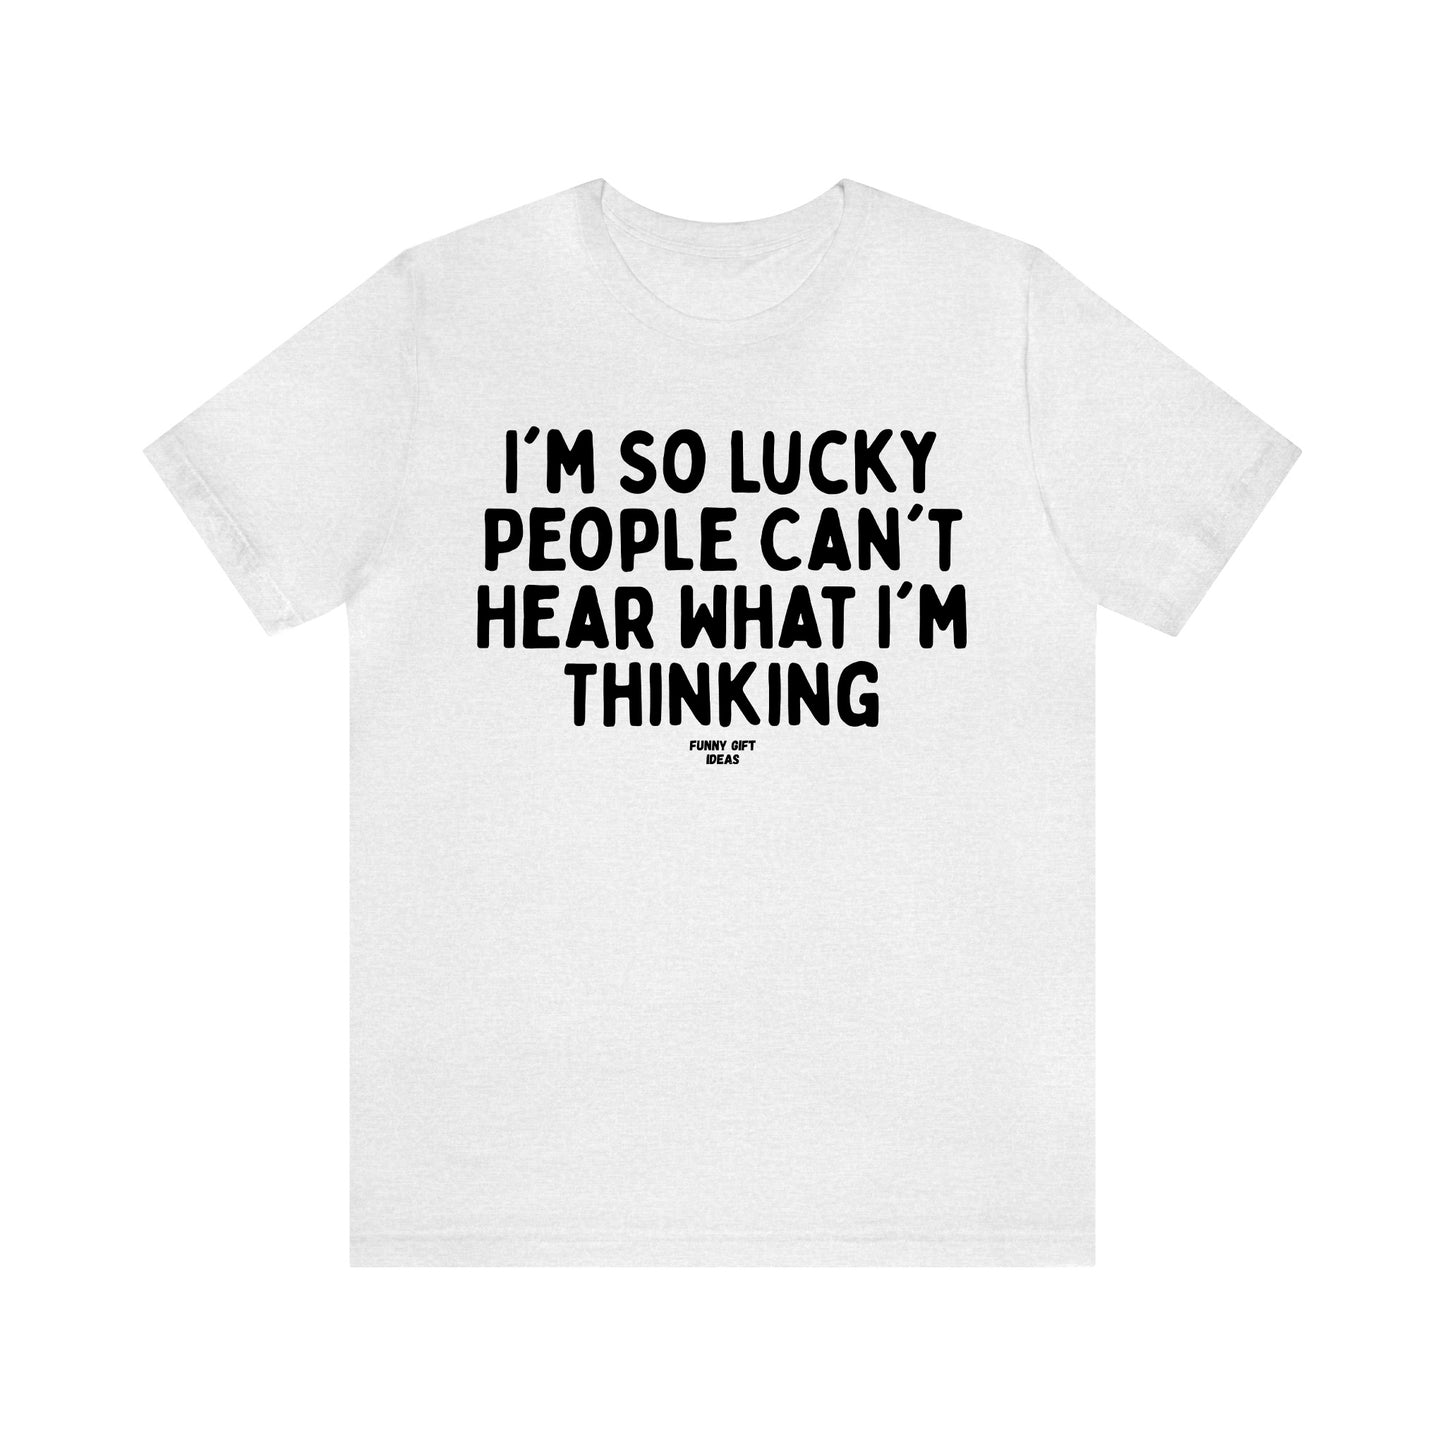 Funny Shirts for Women - I'm So Lucky People Can't Hear What I'm Thinking - Women's T Shirts